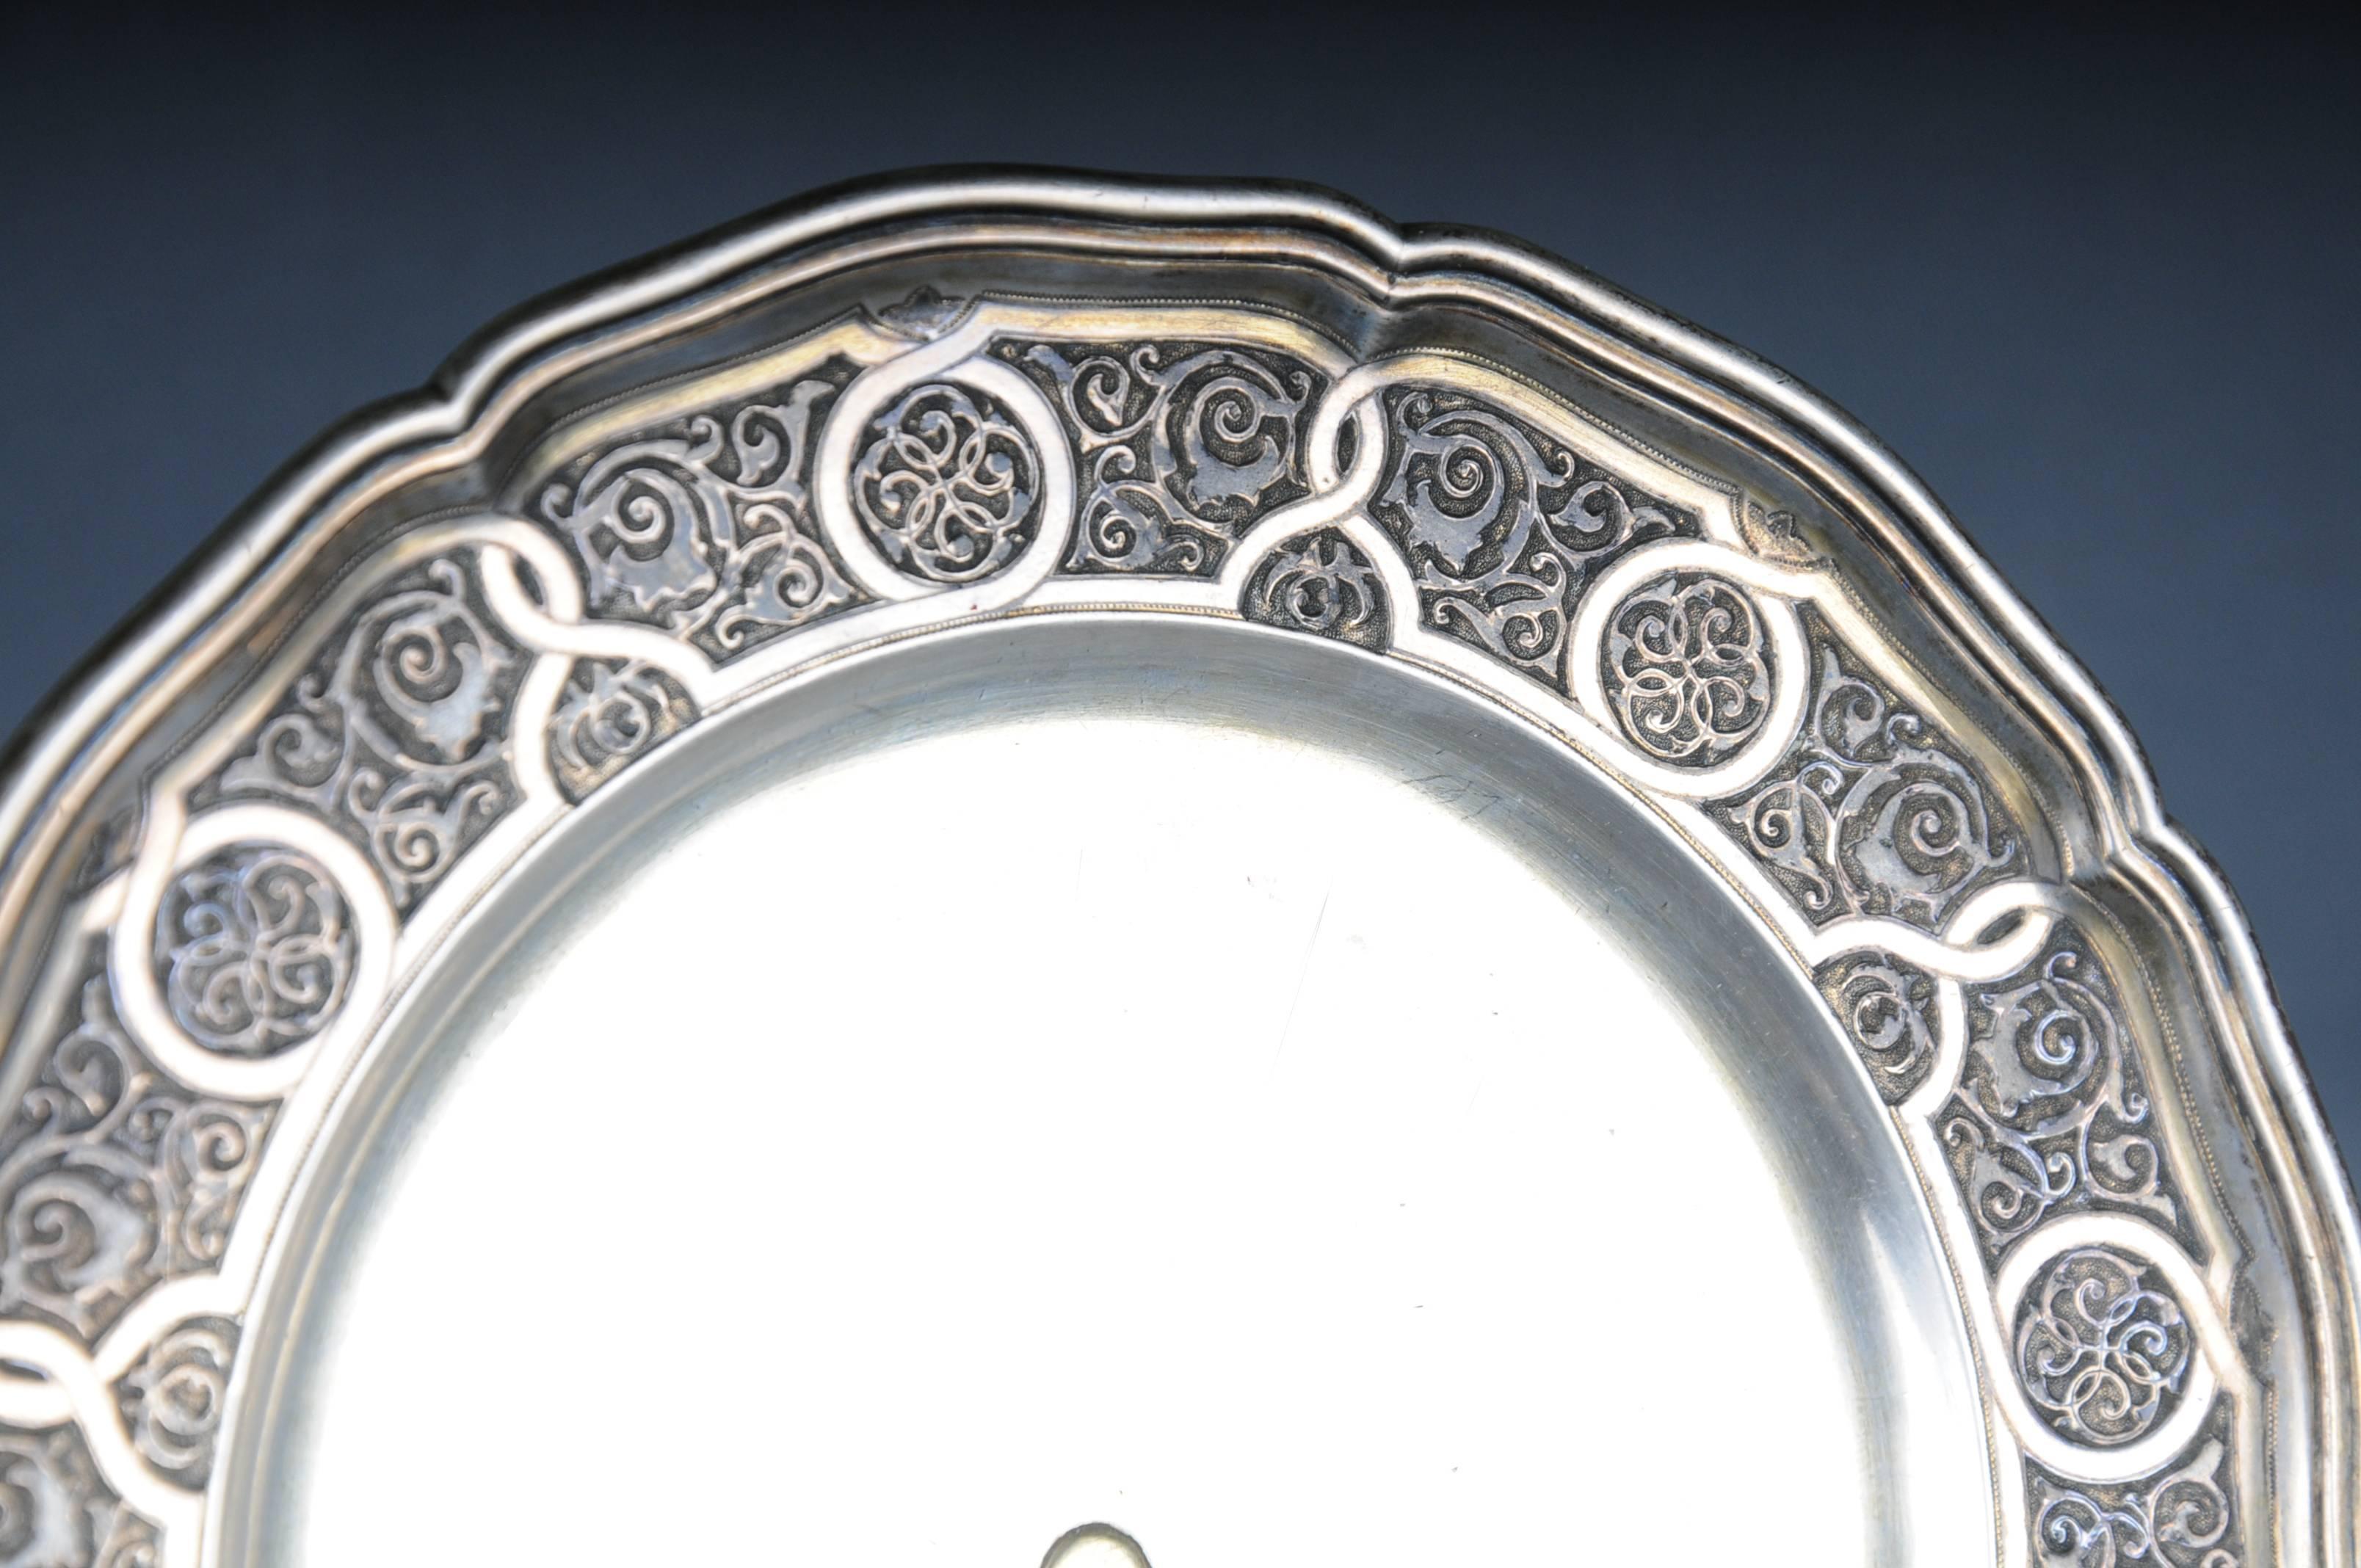 Antique Russian plate 84 Silver edge decoration 

Viktor Sawinkow 875 Silver

Weight 201 grams

The condition can be seen in the pictures.
